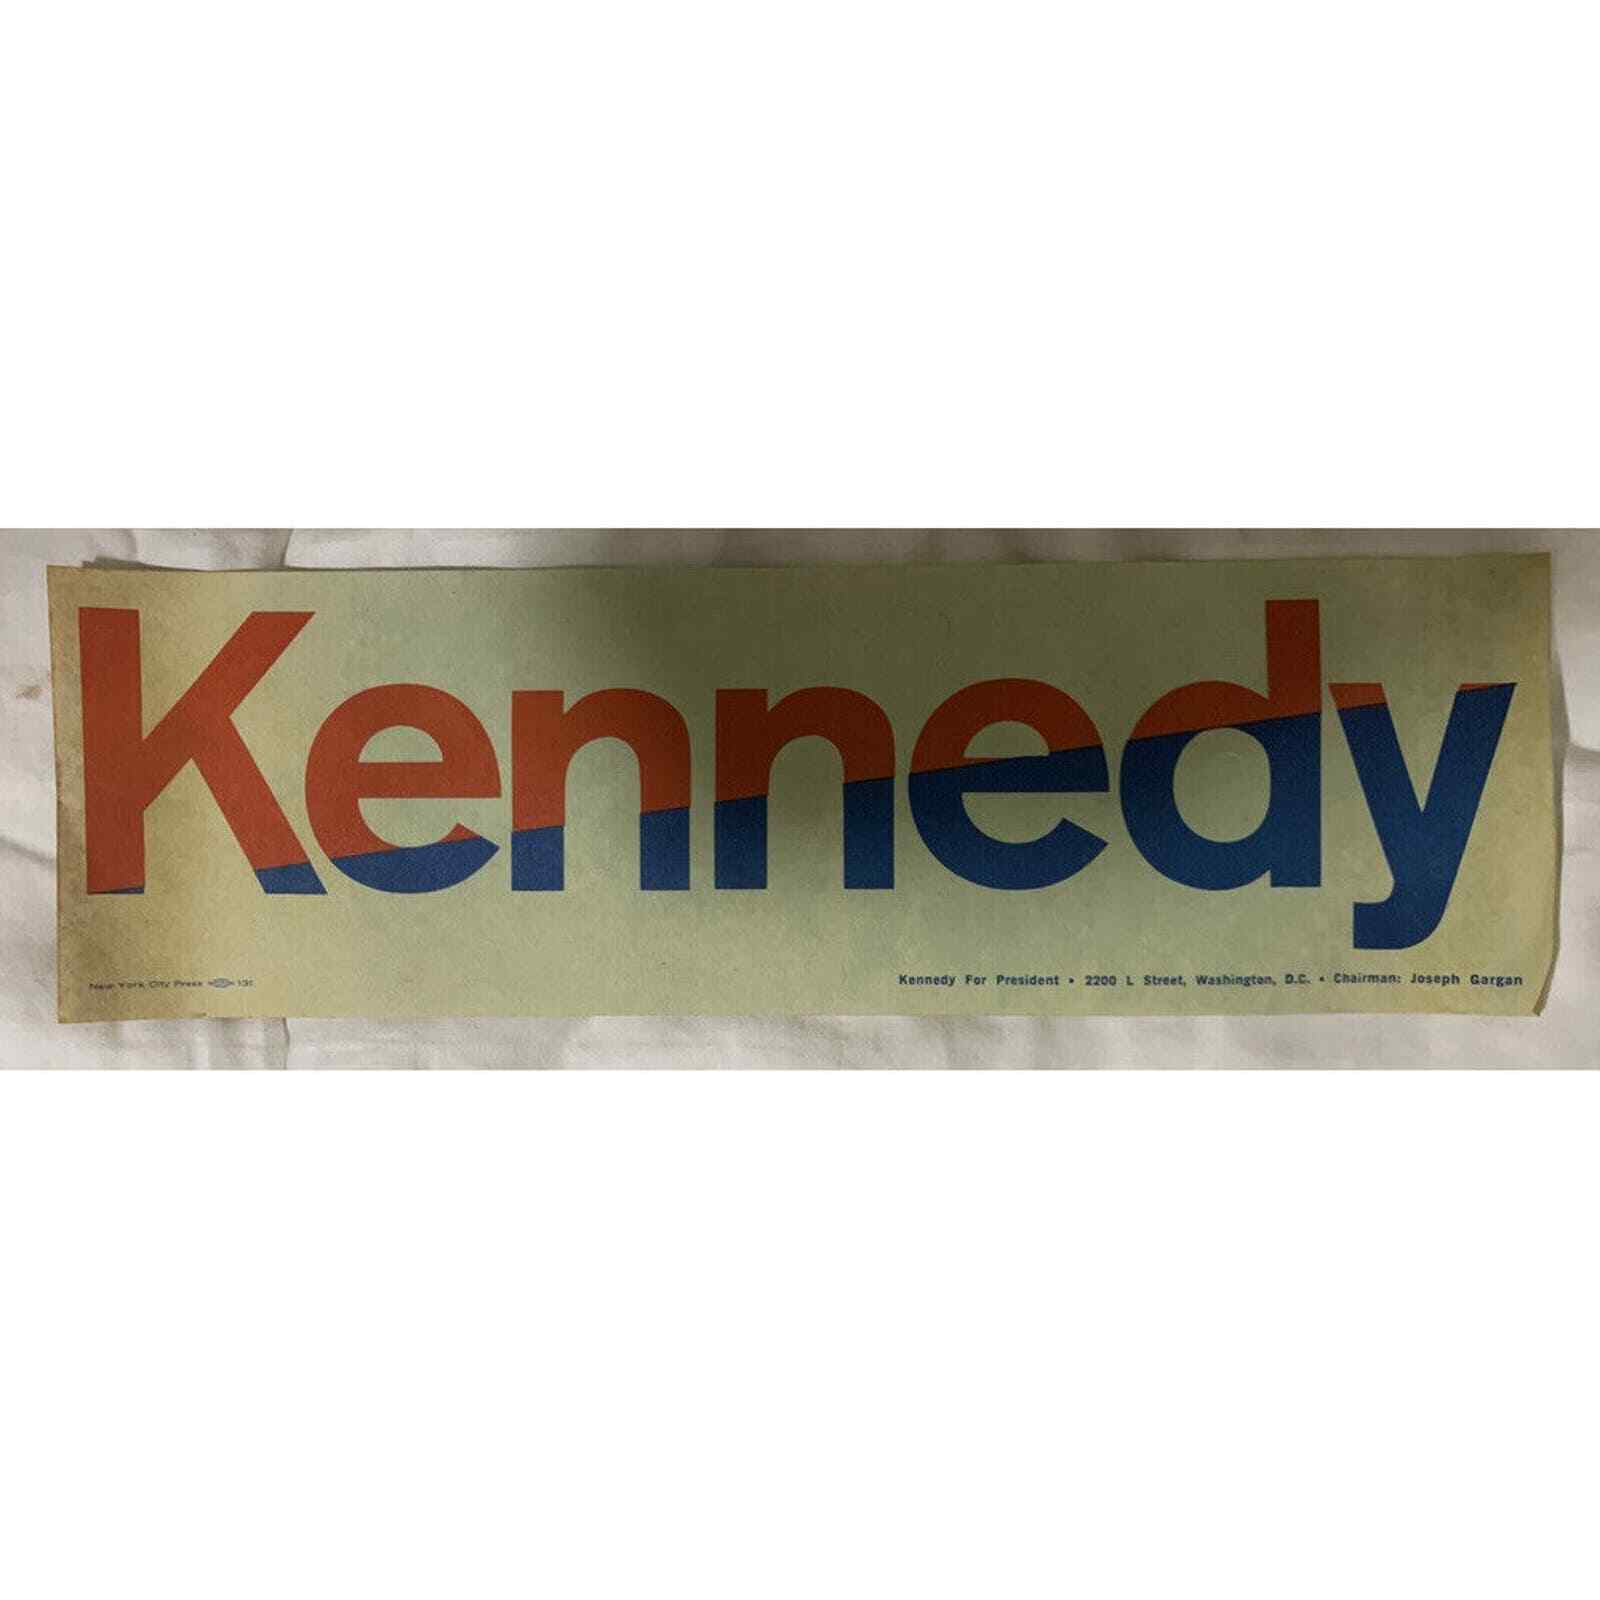 Authentic Vintage Kennedy for President Sticker 12.5 x 4